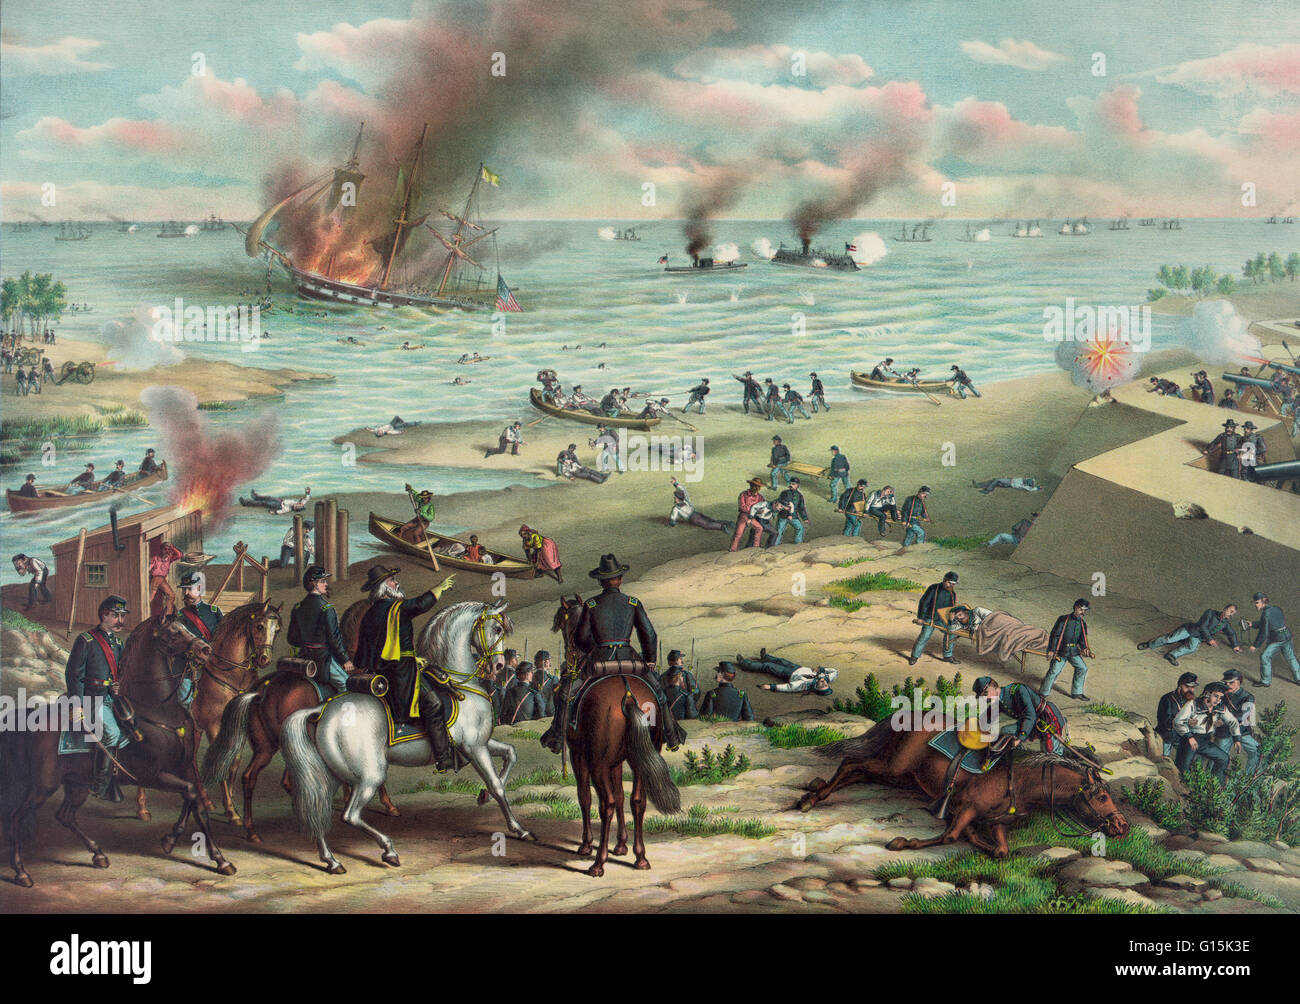 Illustration of the battle between the ironclad warships Monitor and Merrimac; also shows a different Union ship sinking and rescue boats being put to sea from shore, as well as a Union artillery bunker, Union soldiers and officers, and some rescued sailo Stock Photo